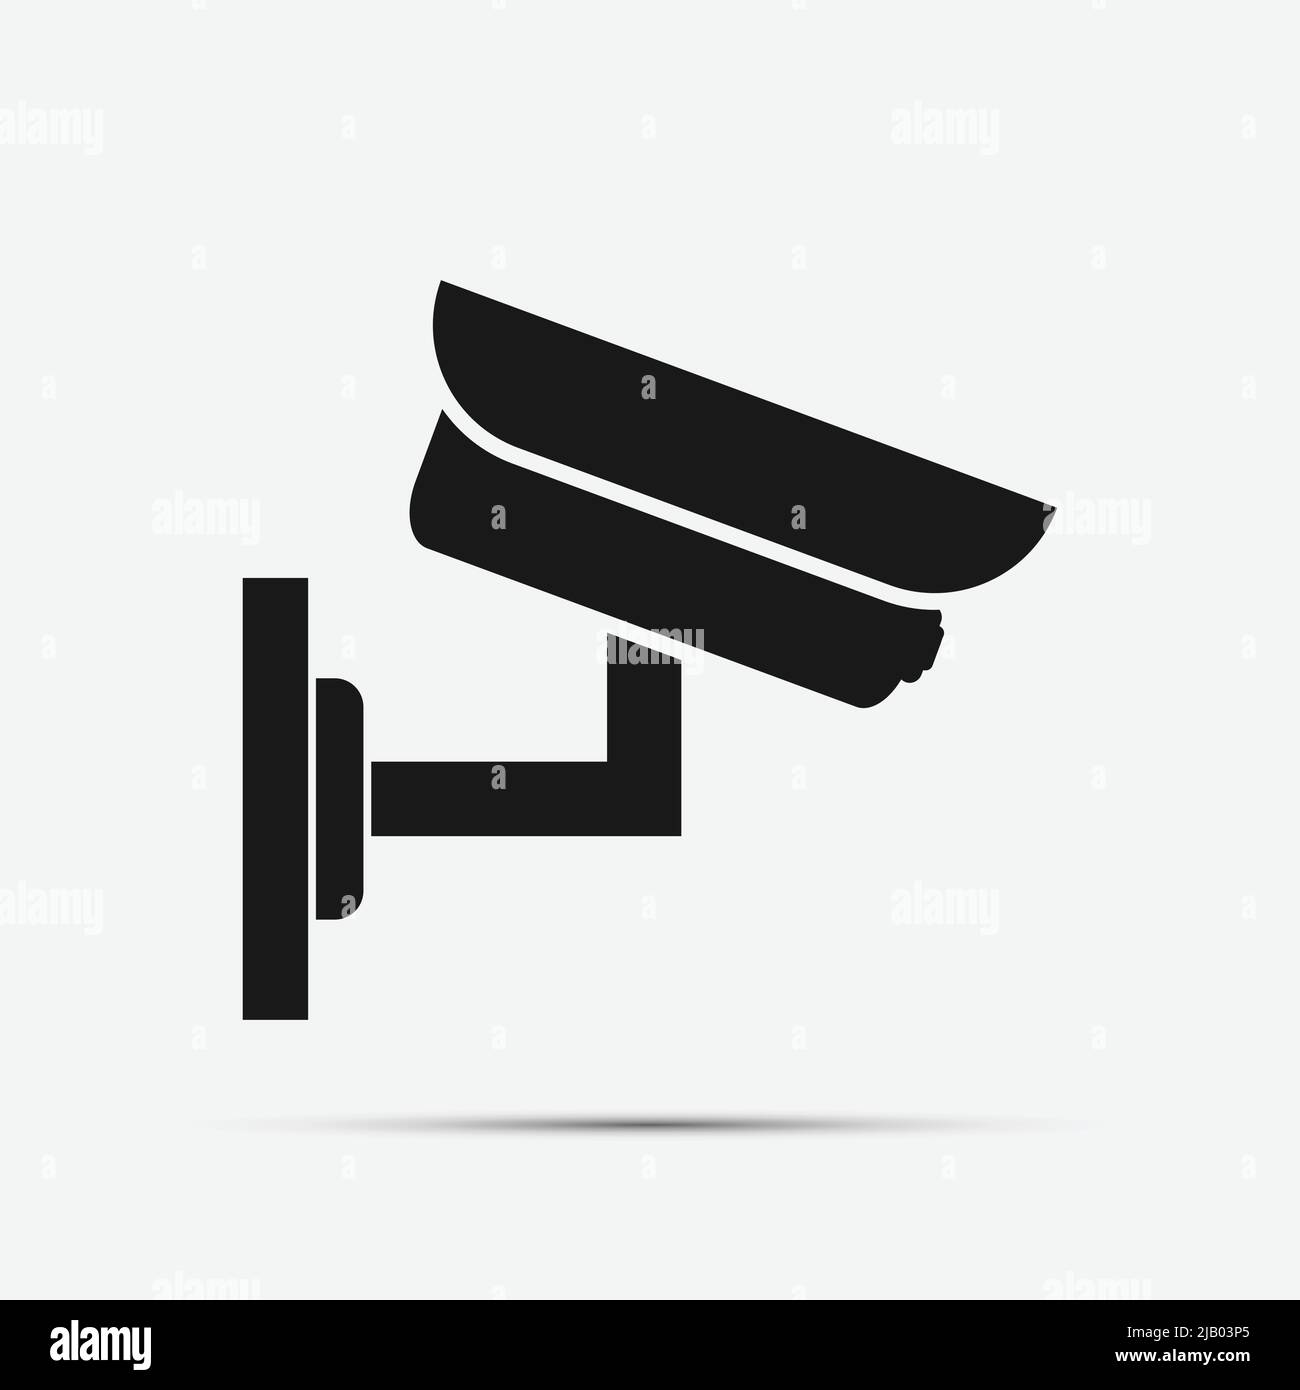 Cctv camera isolated on white background.vector illustration Stock Vector